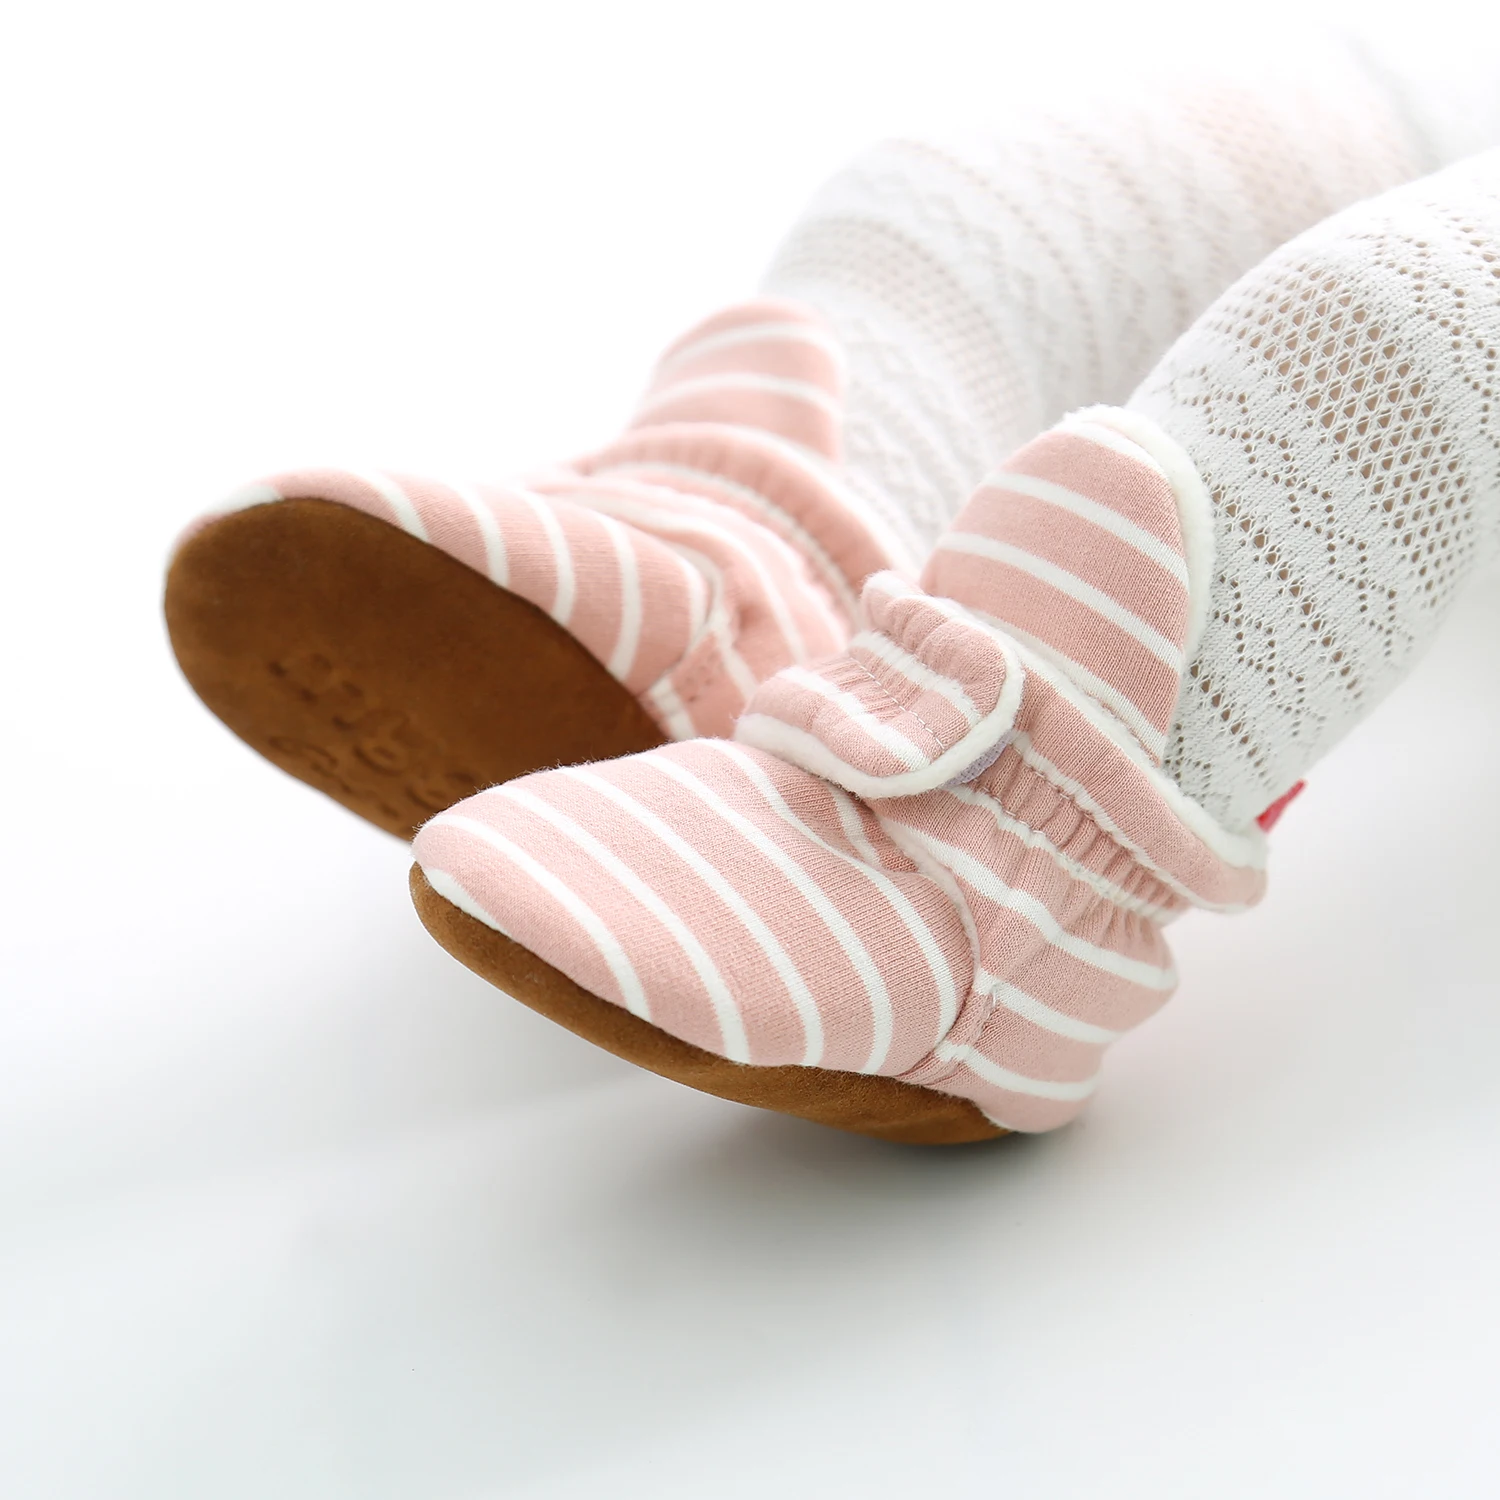 

CALICOKIKI Newborn Baby Shoes Striped Knitted Fabric 0-1 years Old Infant Soft Sole Shoes winter Warm Boots for Toddler